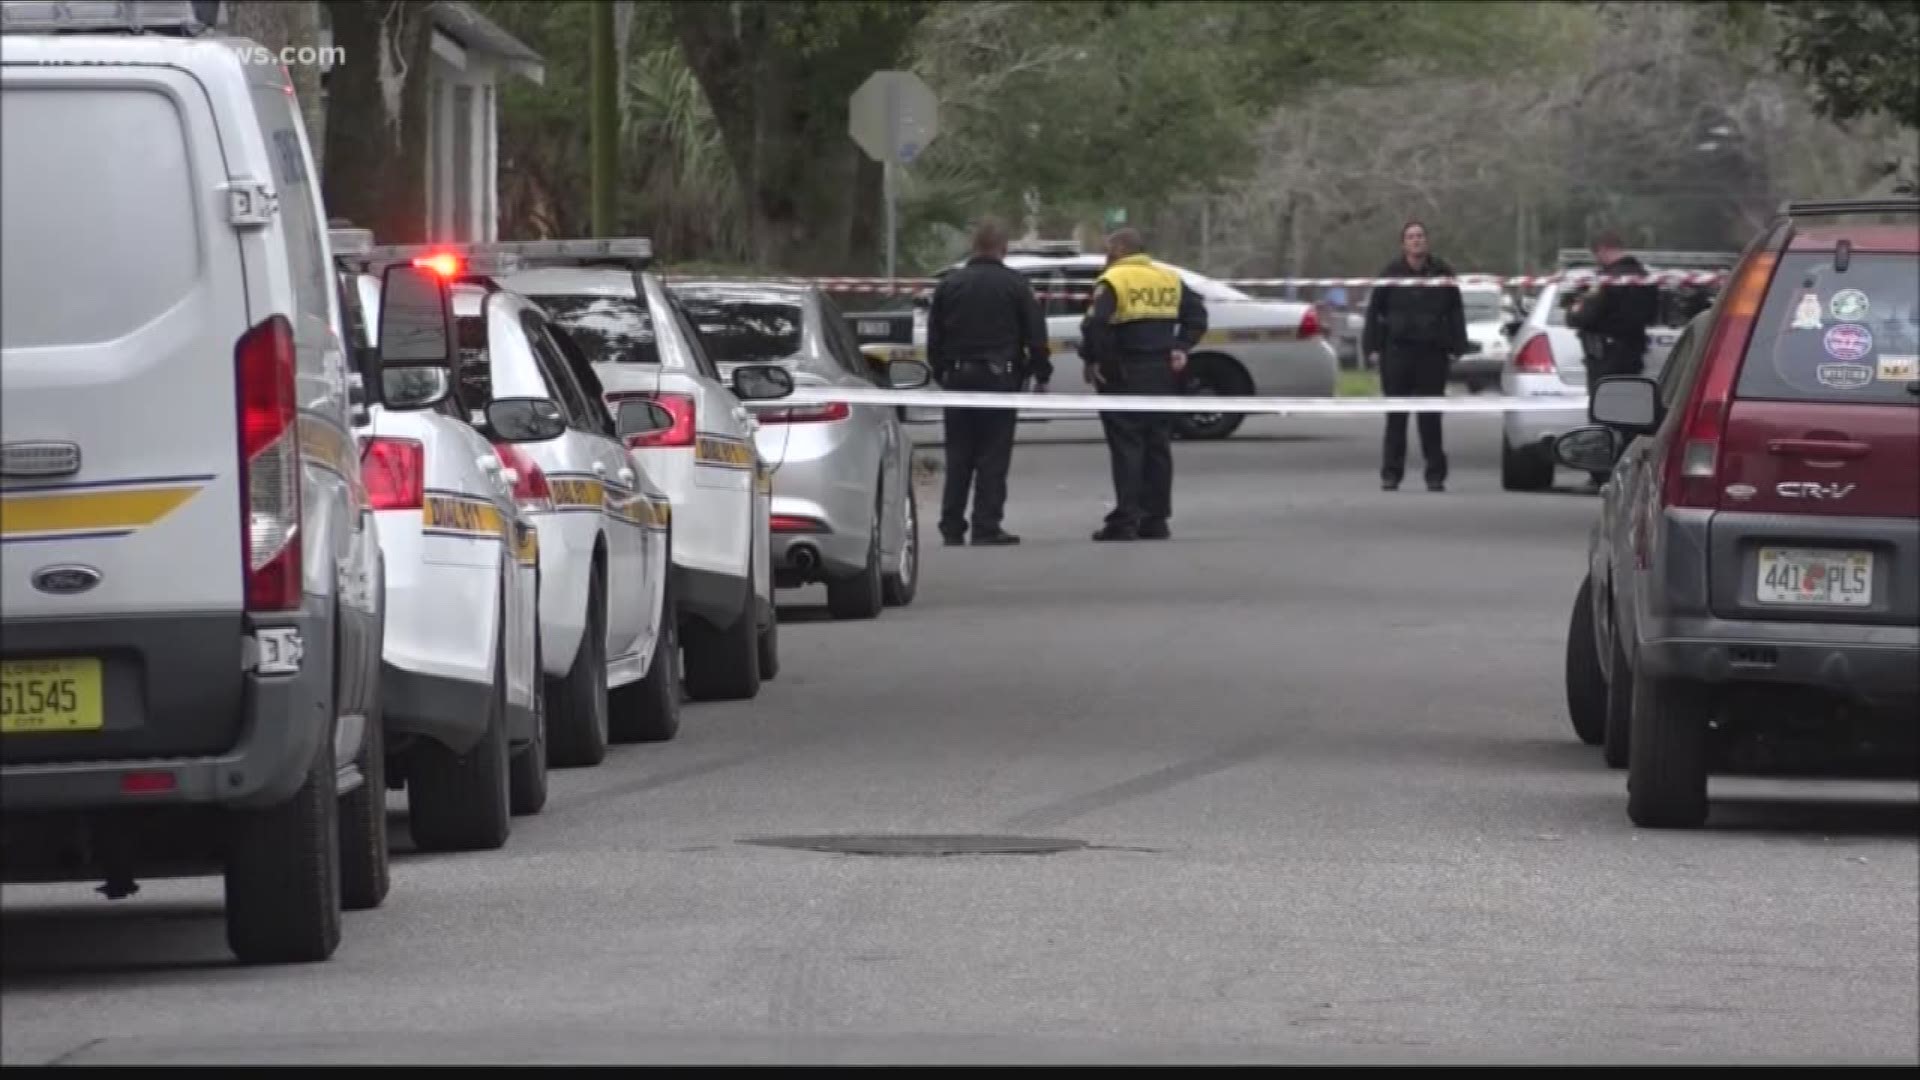 A man was shot in the leg during a drive-by shooting in a Murray Hill area neighborhood. Police are looking for a black sedan in connection with the shooting.